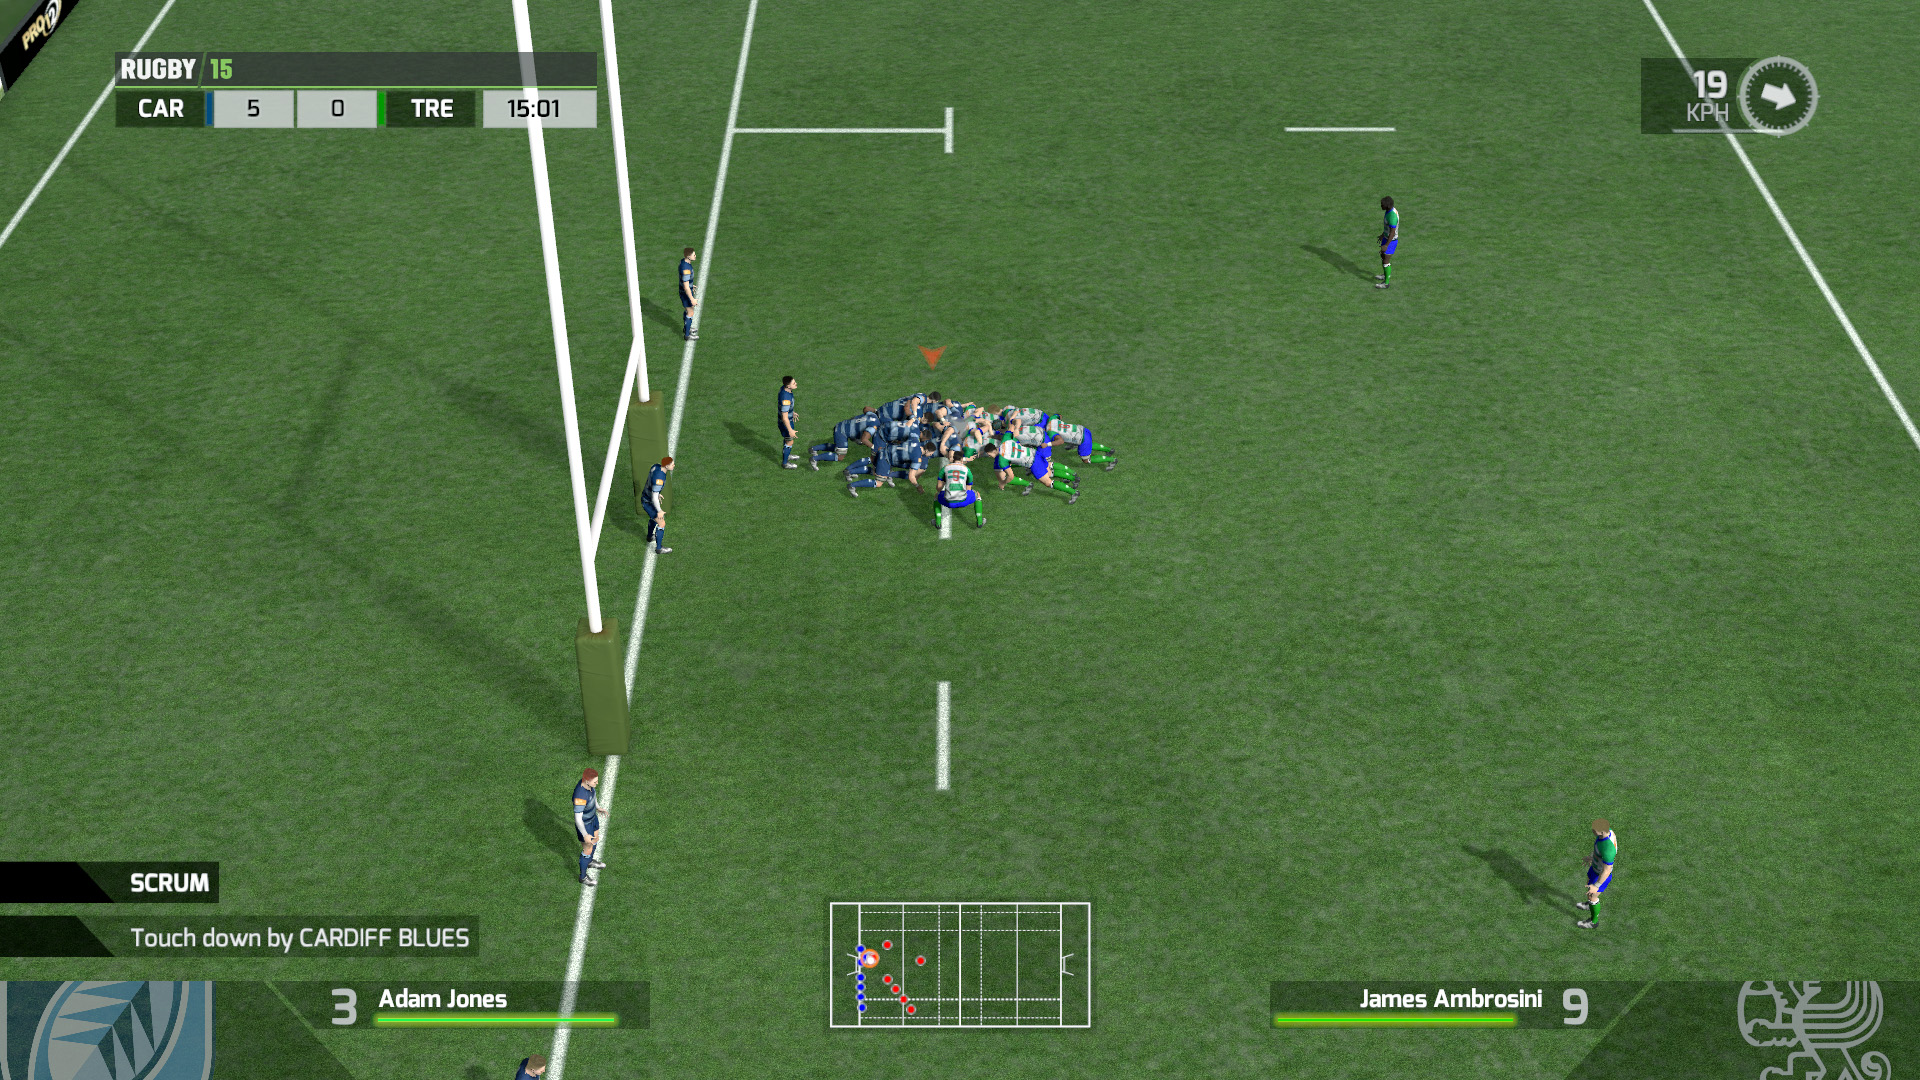 rugby 15 recensione